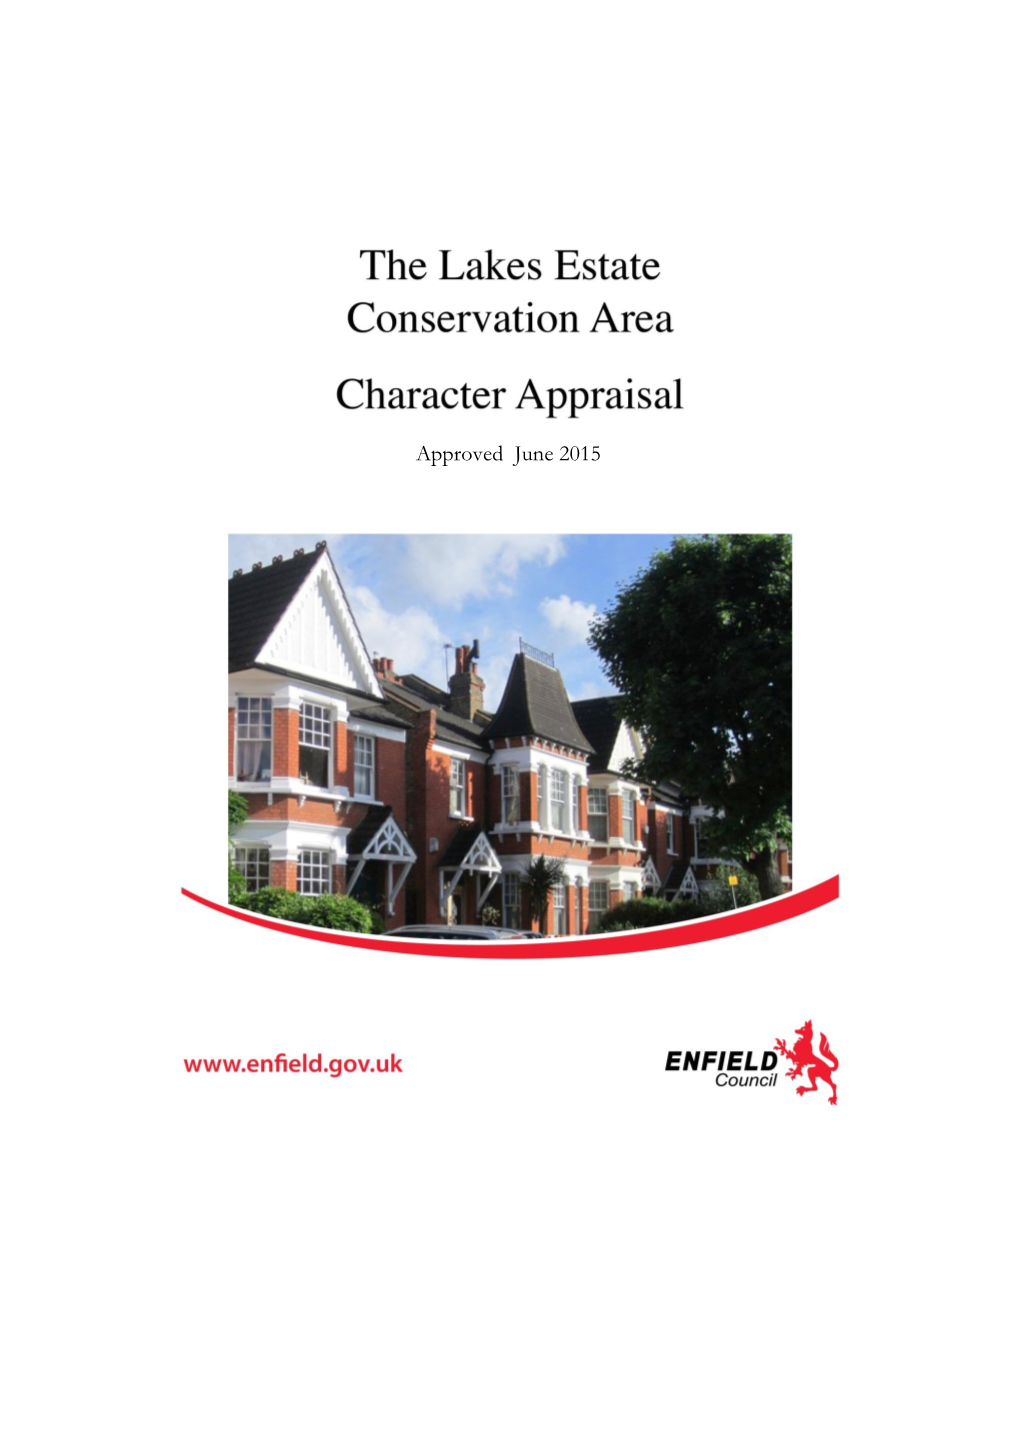 The Lakes Estate Conservation Area Character Appraisal